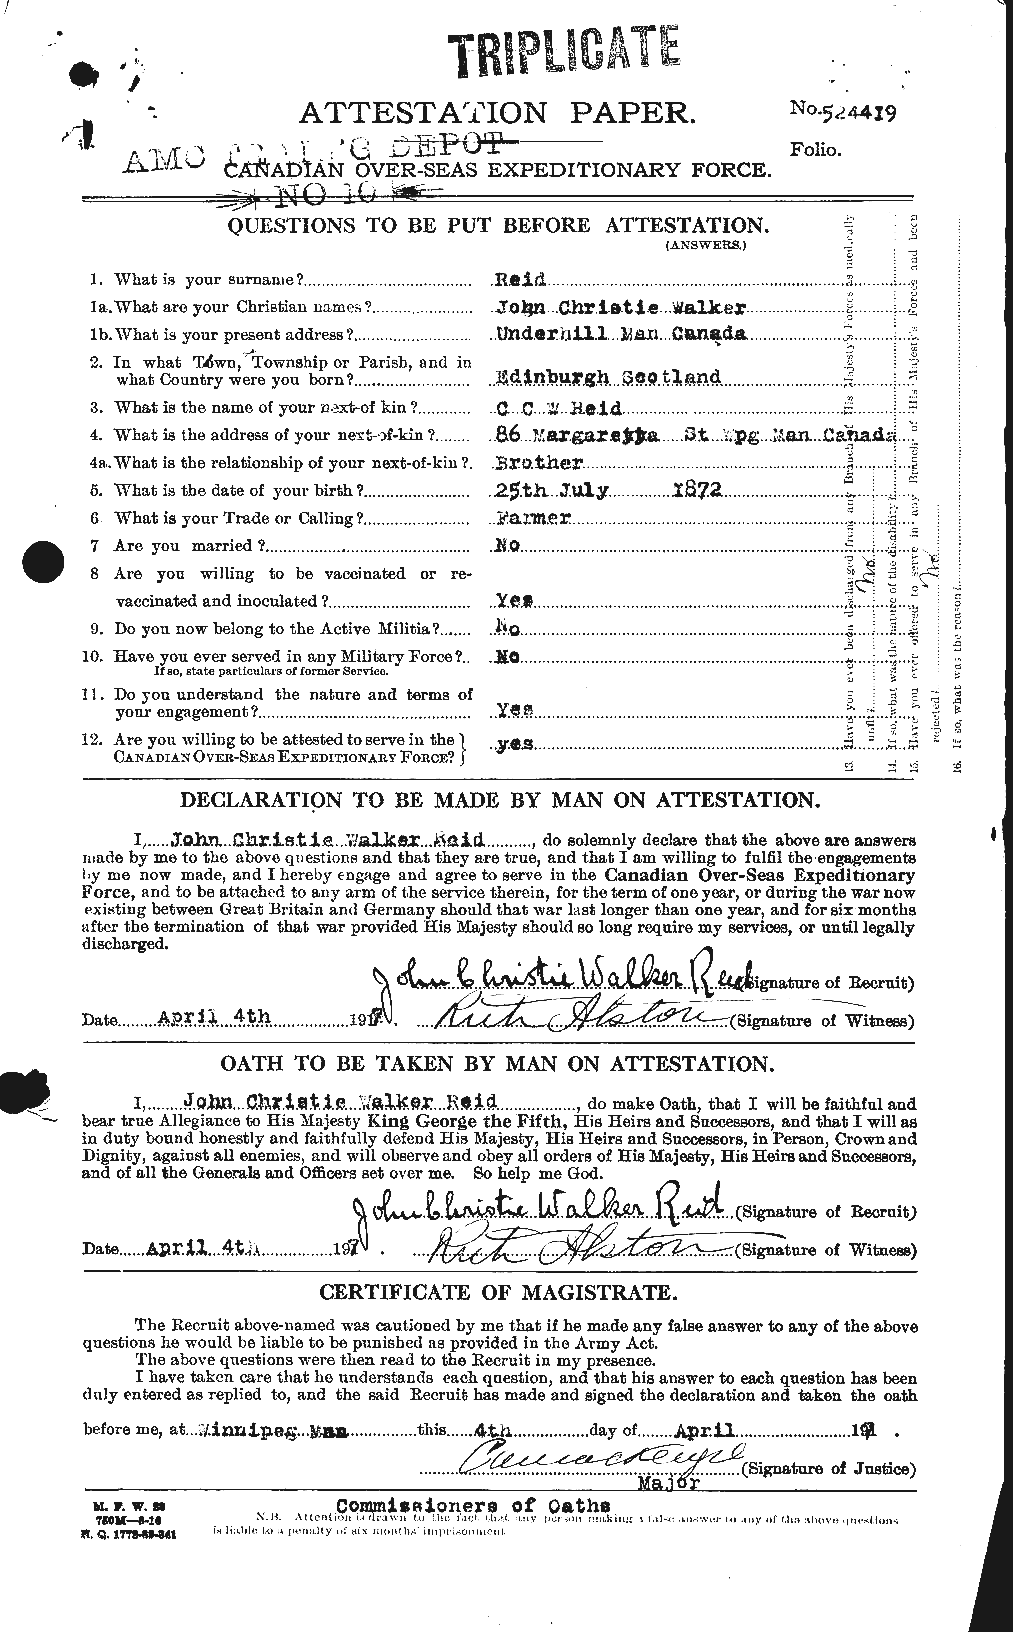 Personnel Records of the First World War - CEF 598827a